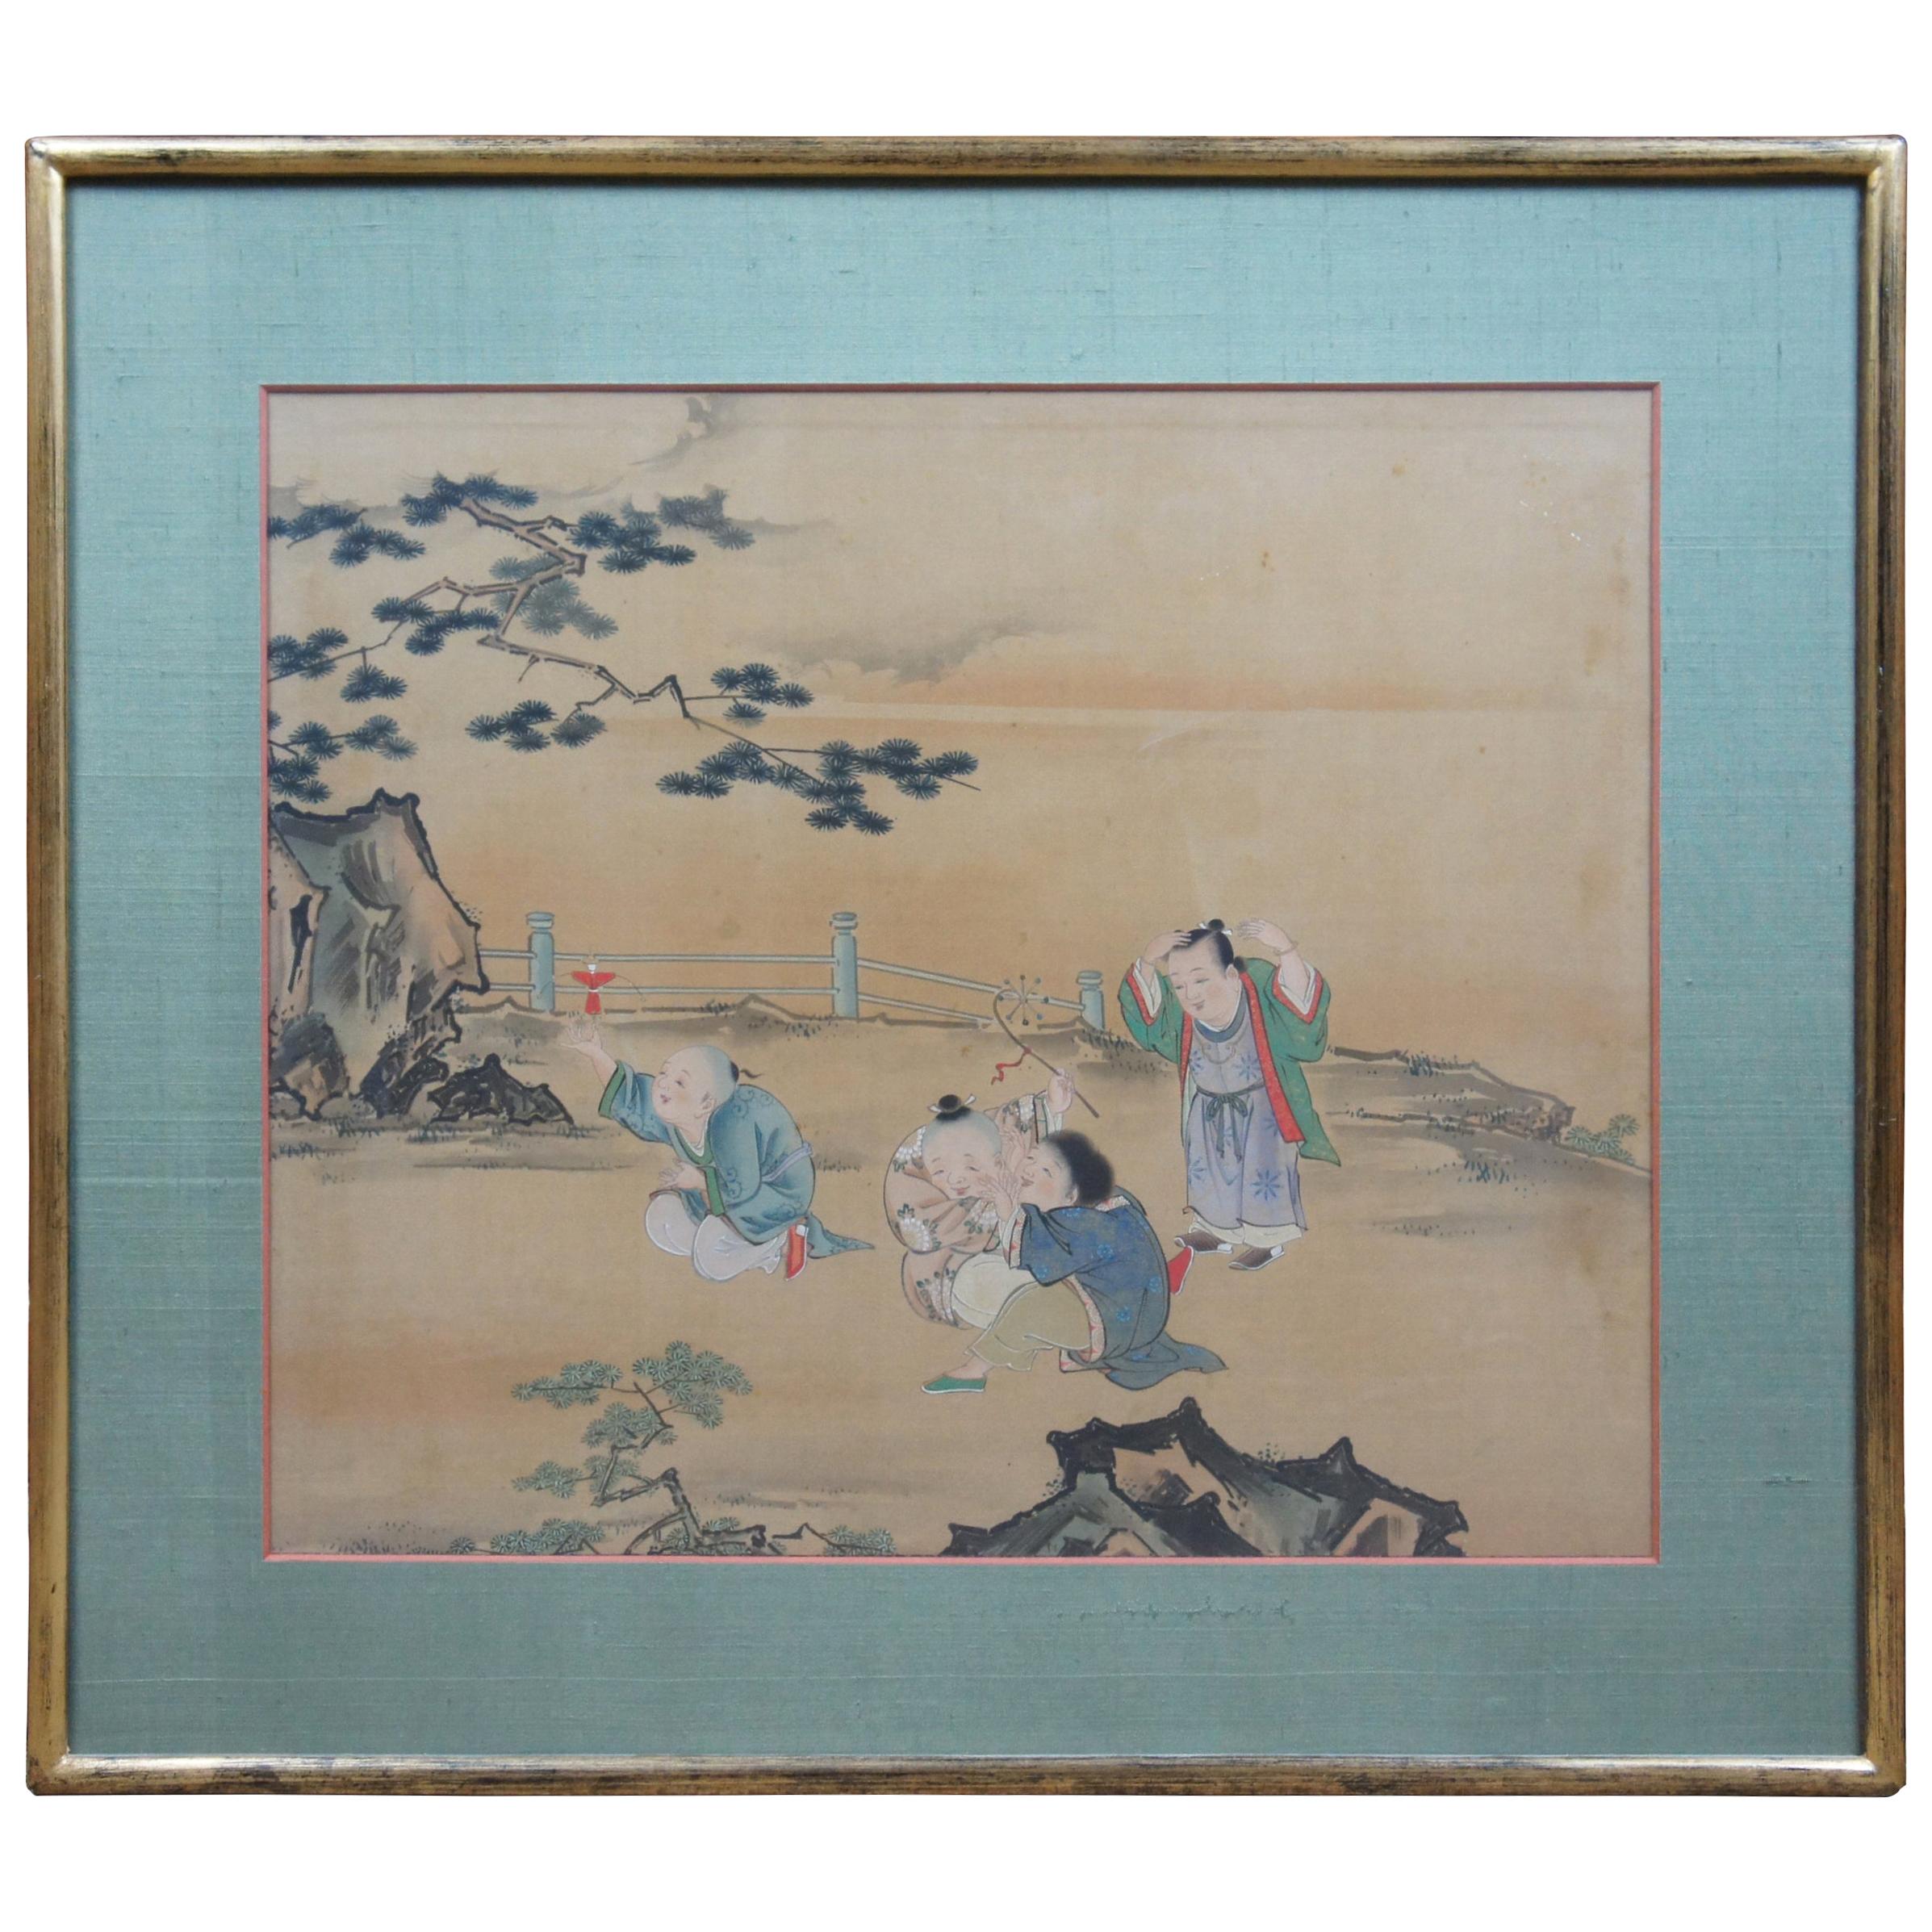 Antique Chinese Painting on Silk Landscape Boys Children Playing Figures